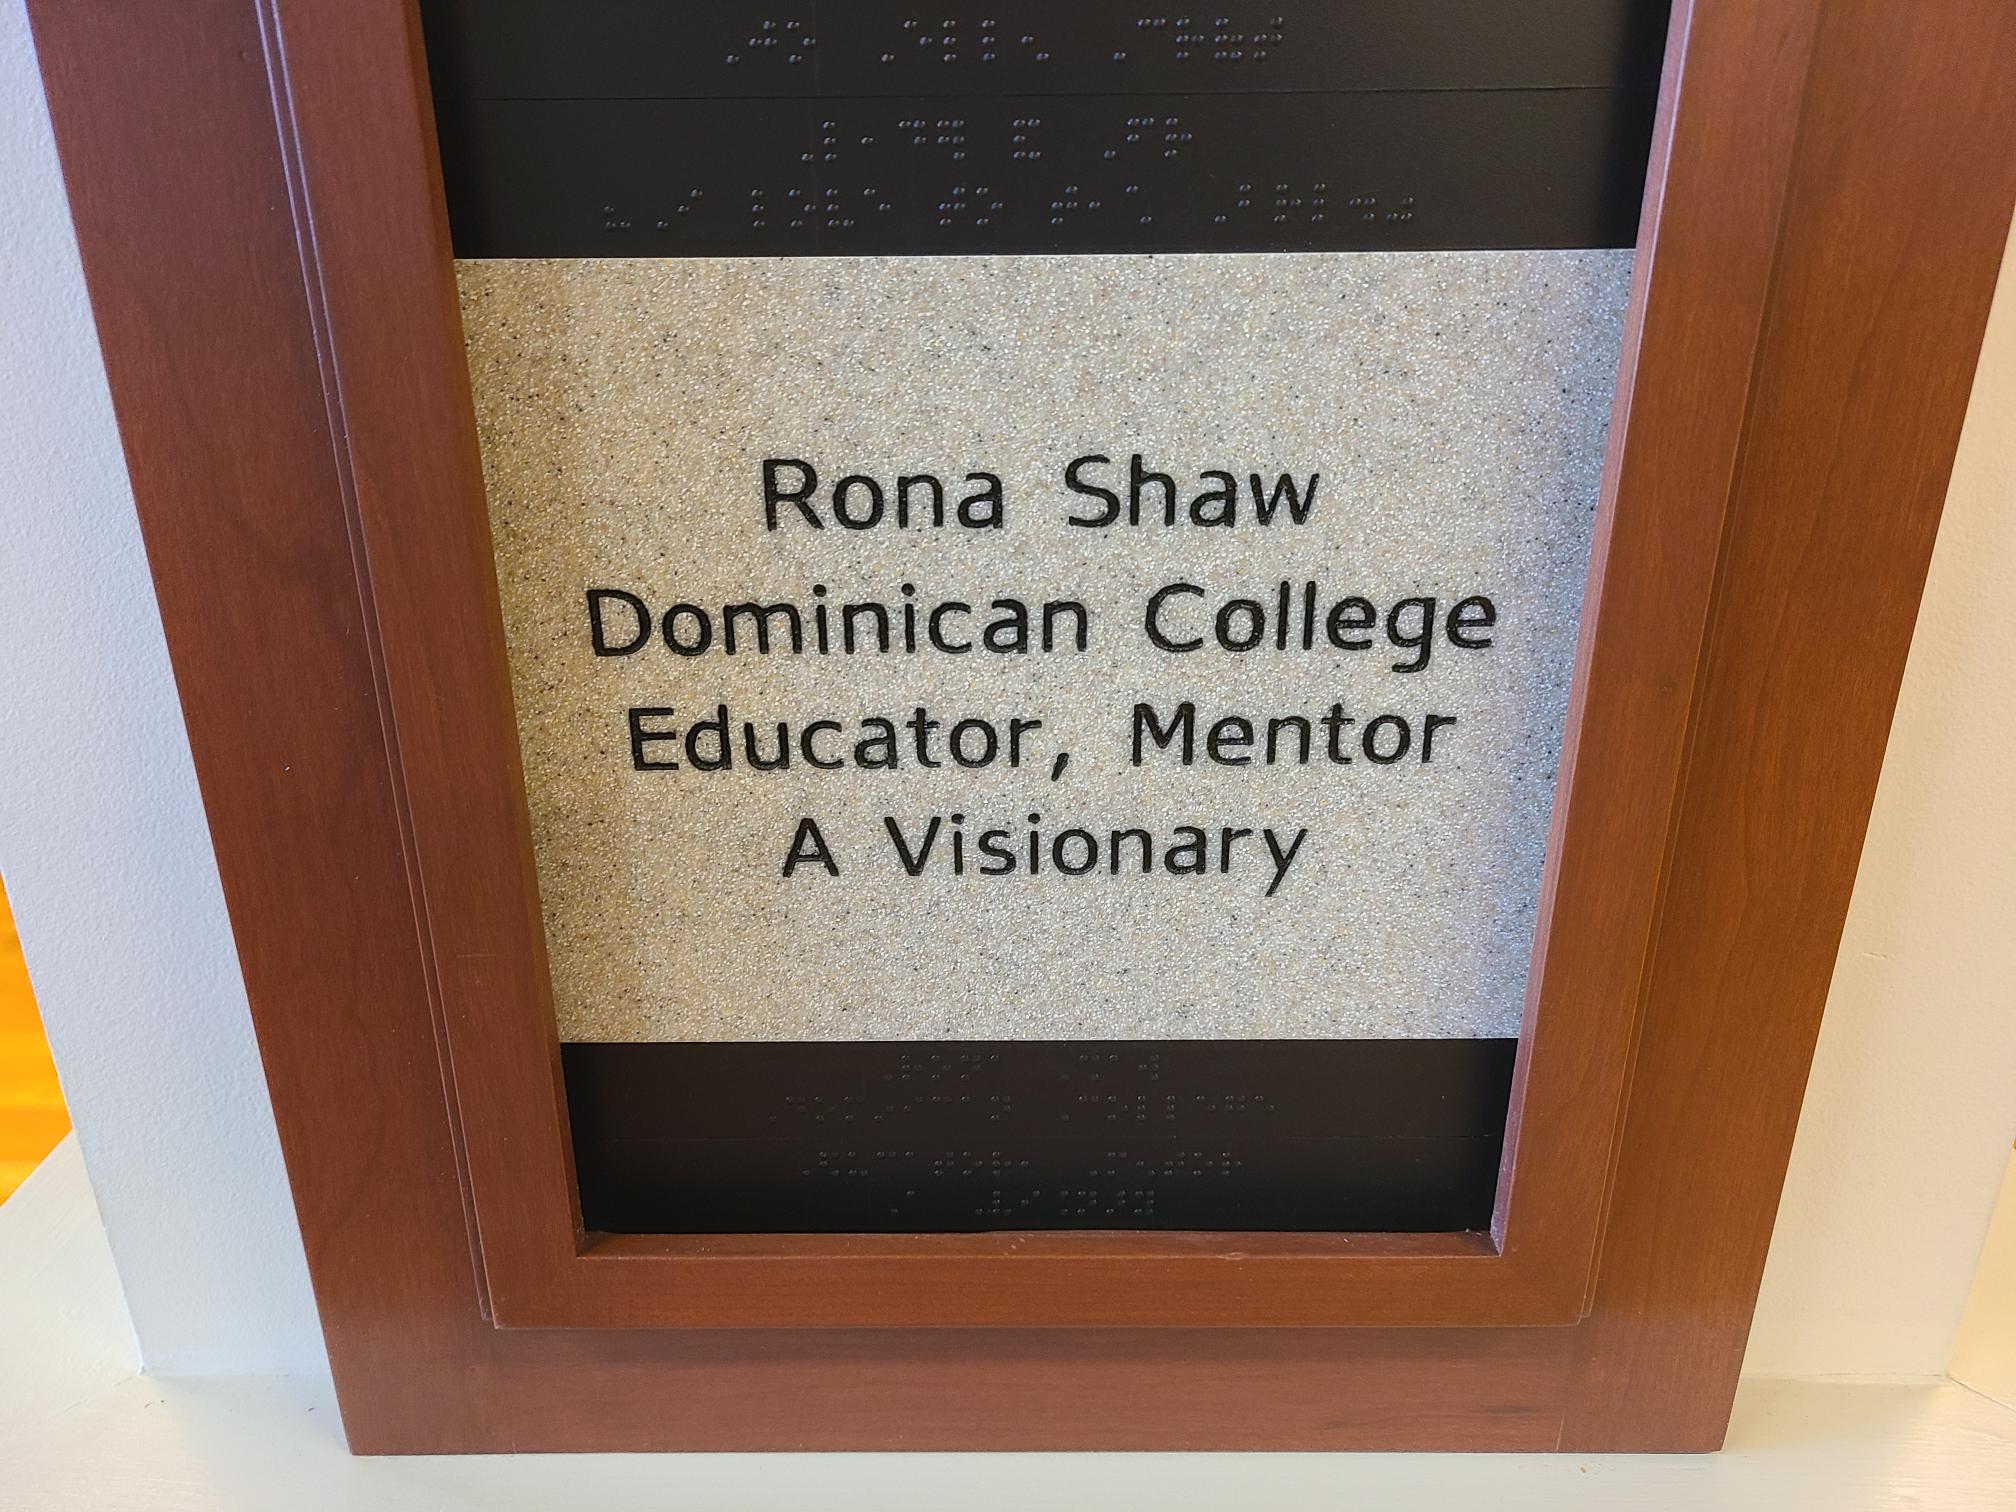 Rona Shaw, Dominican College Educator, Mentor A Visionary